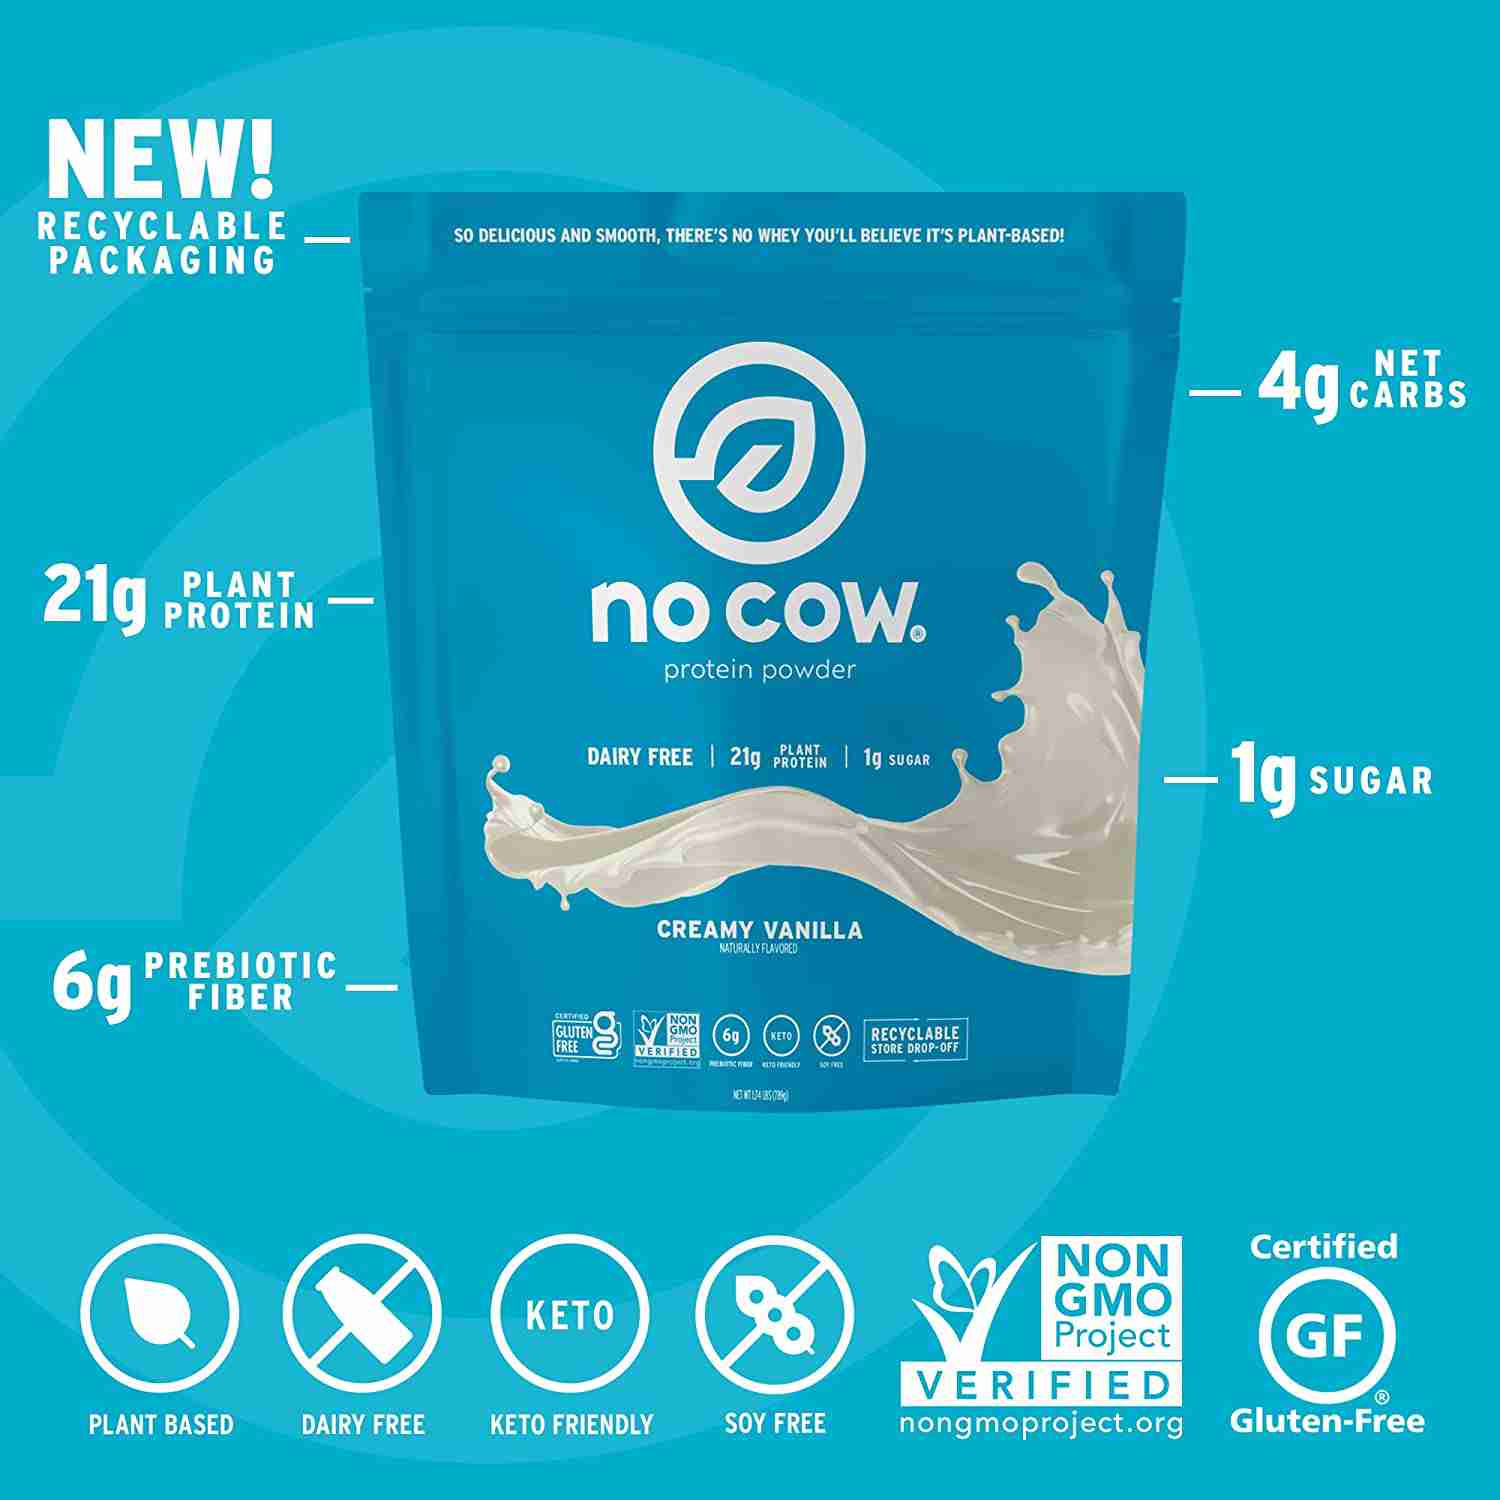 plant-based-protein-powder with discount code